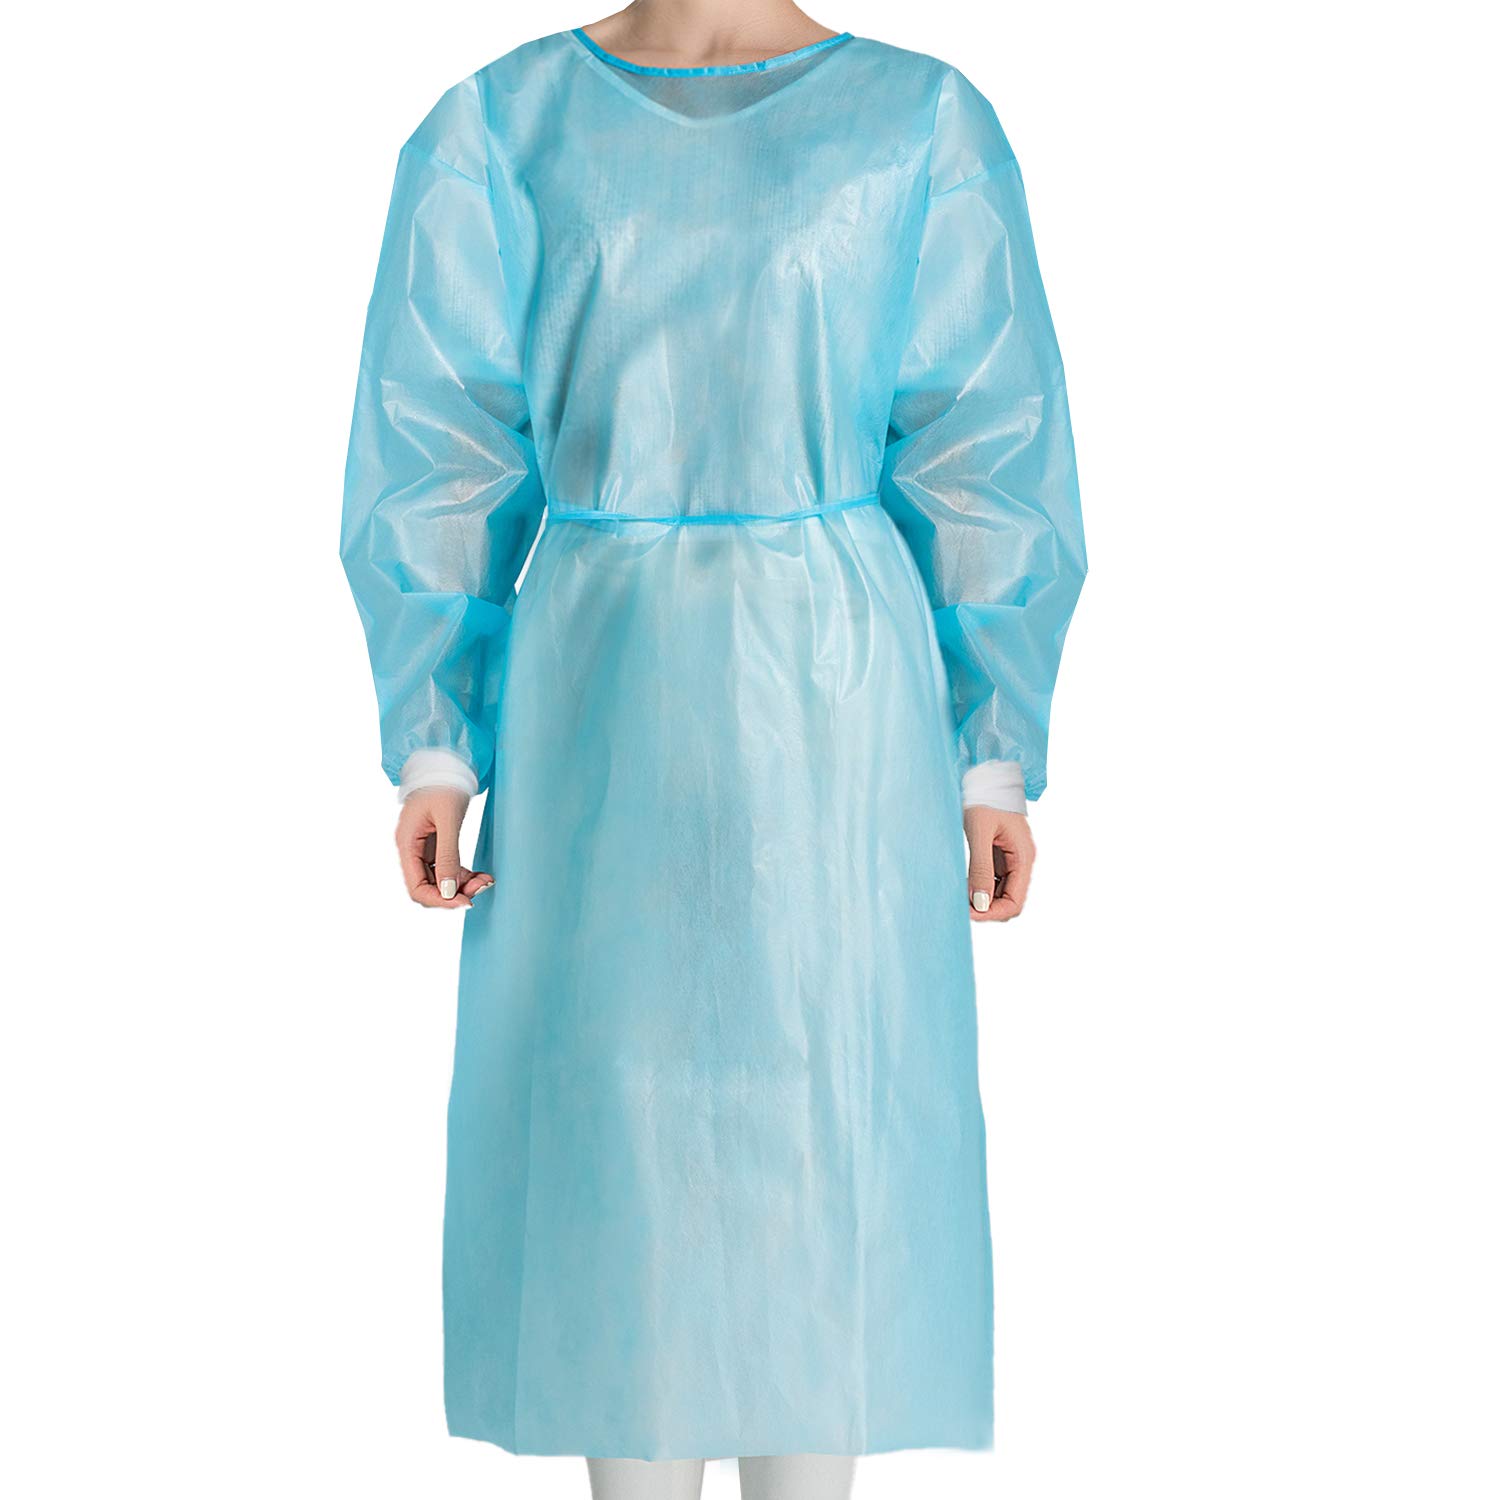 feature-of-disposable-isolation-gown.jpg